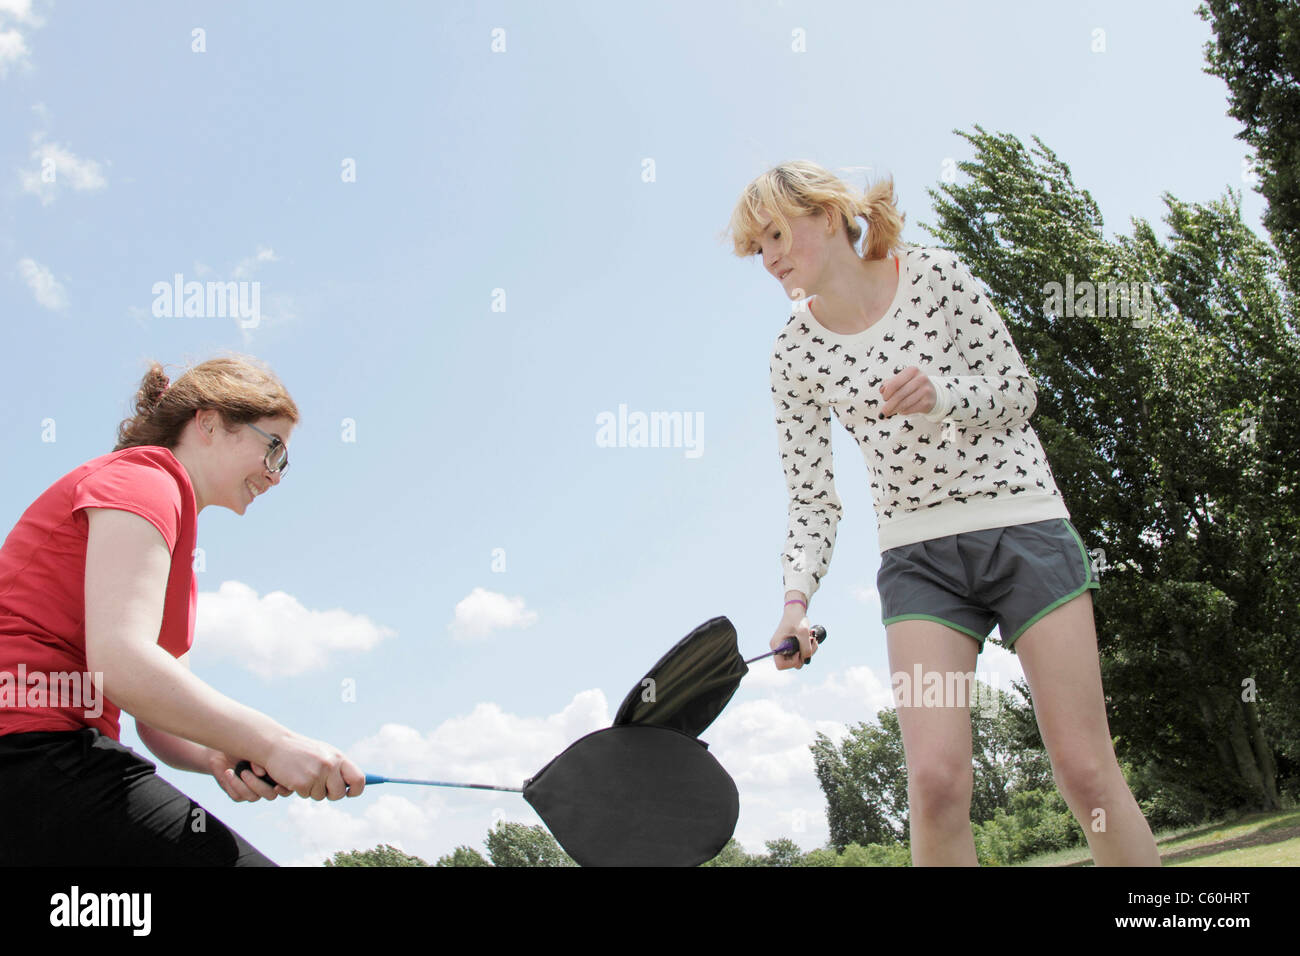 Girls playing with rackets in park Stock Photo